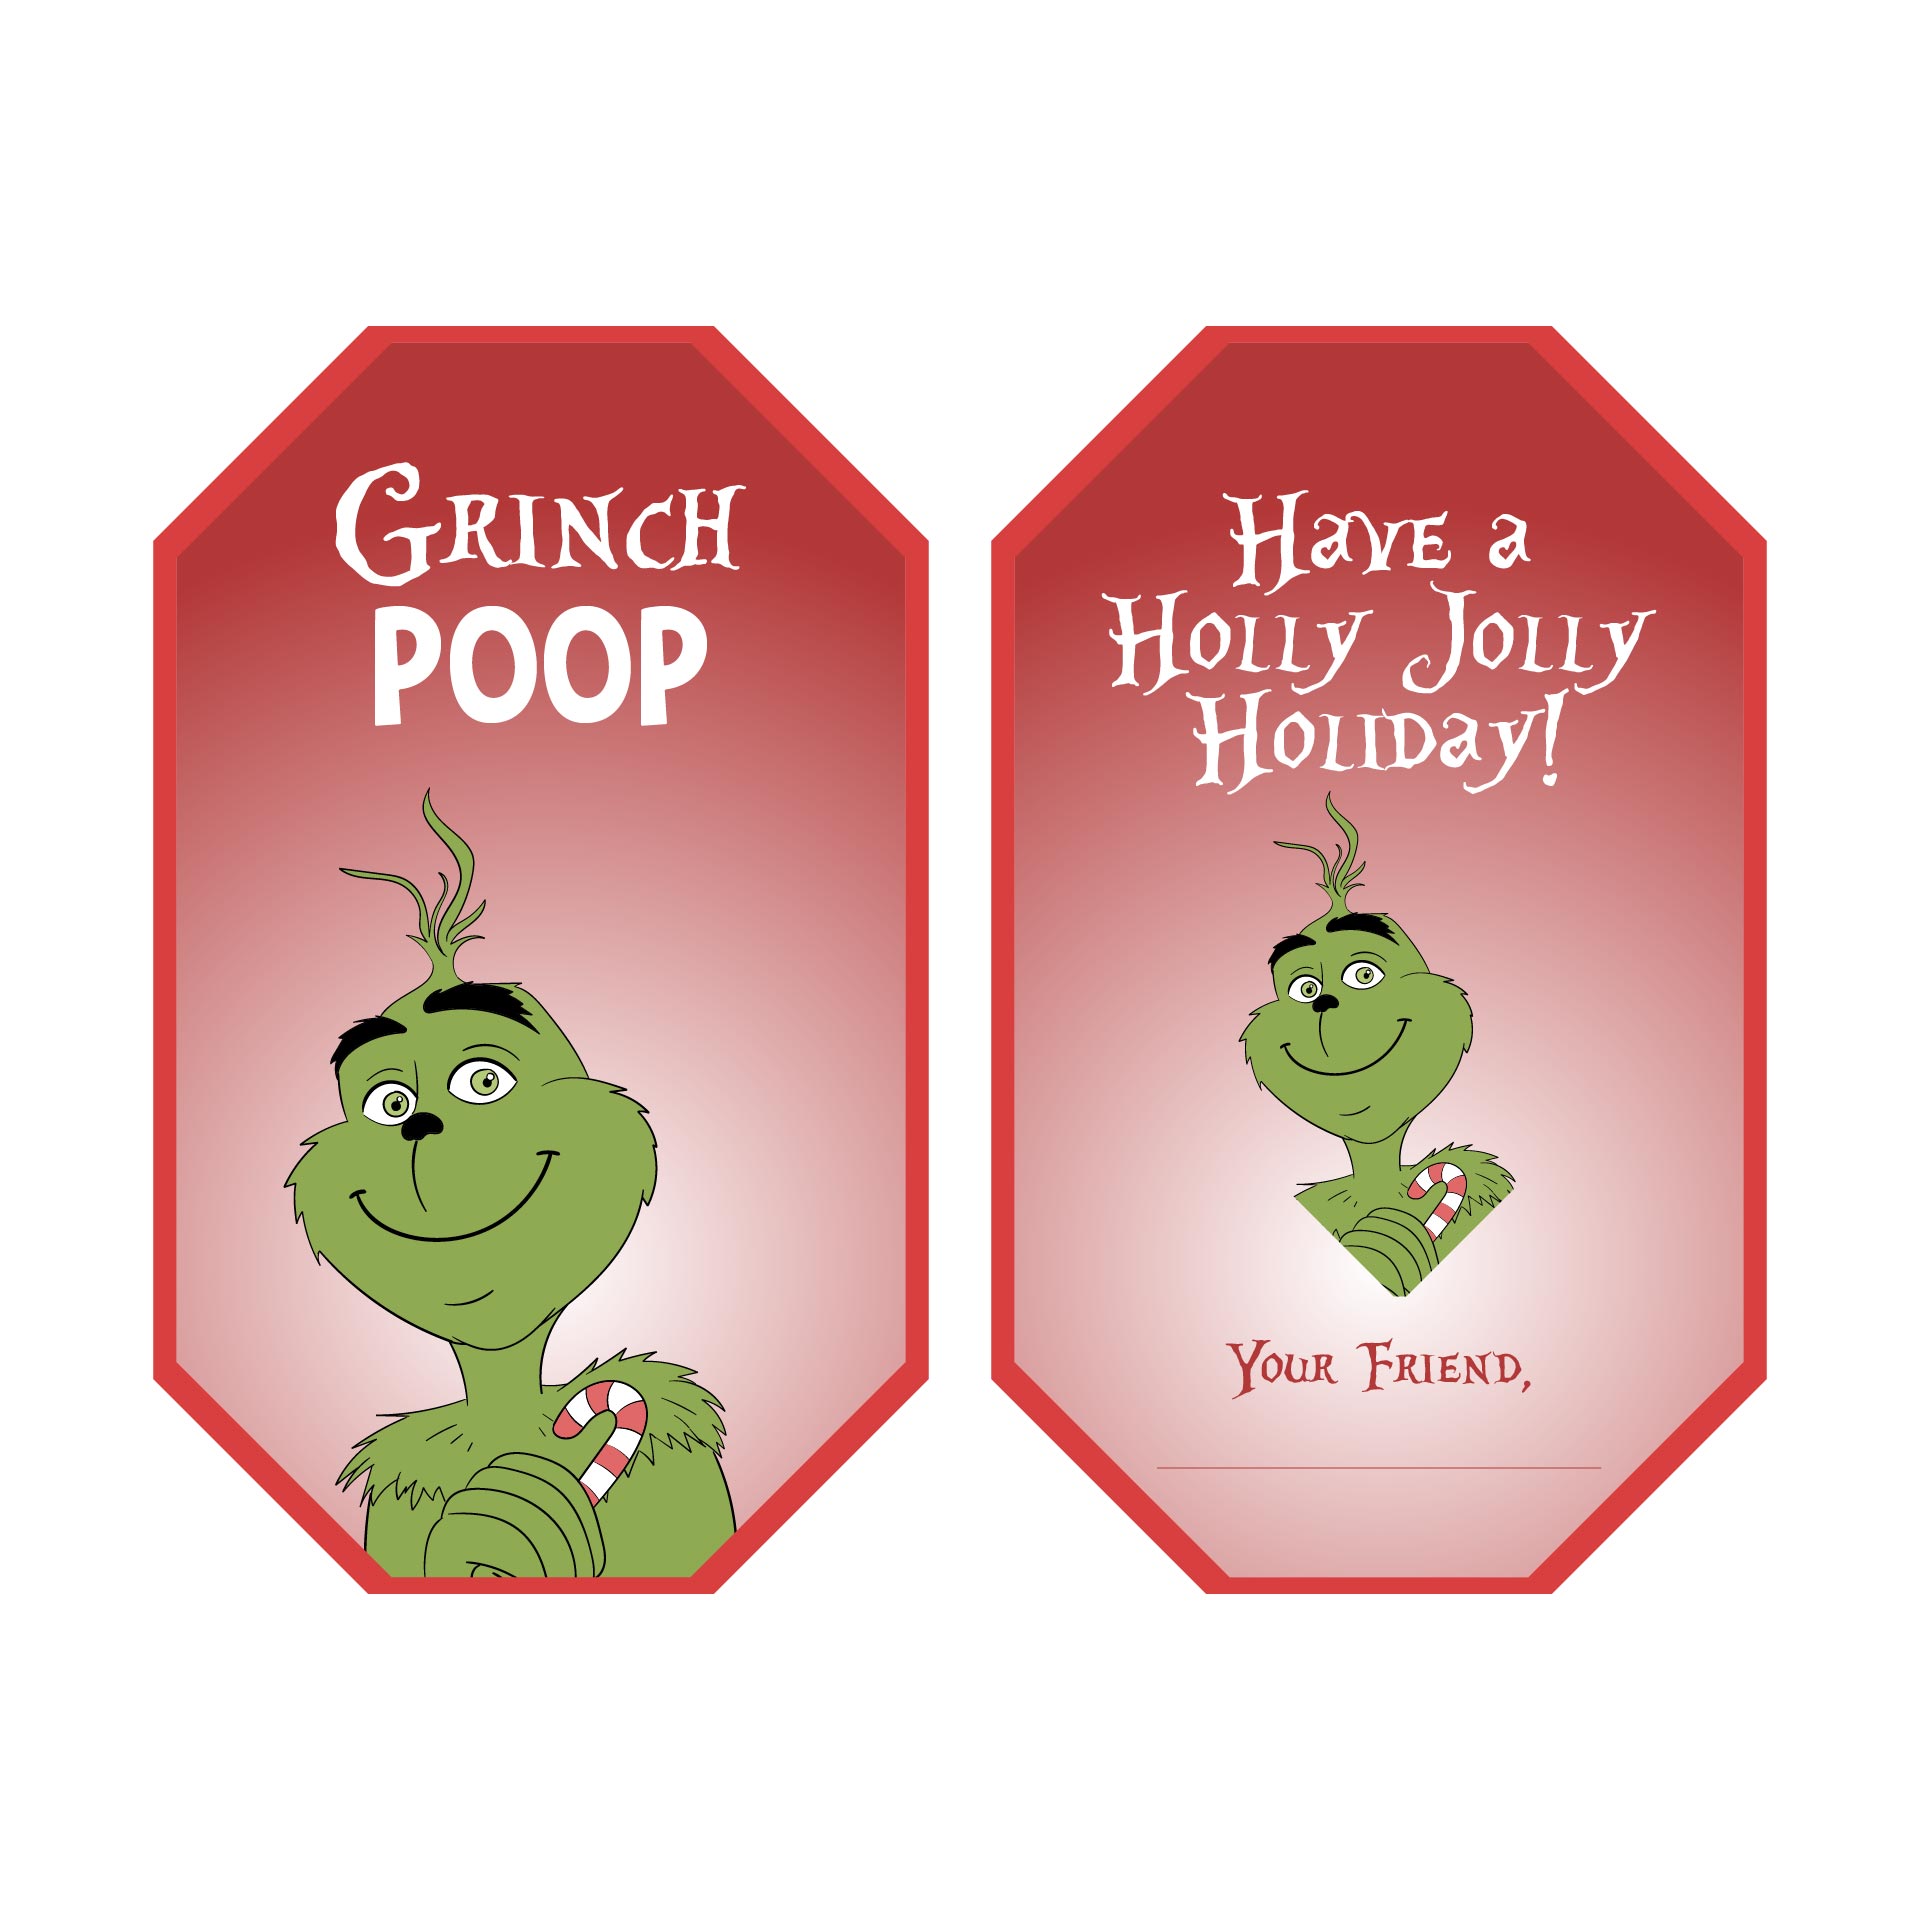 5 Best Images of Printable Grinch Pills Template Grinch Pills Poem